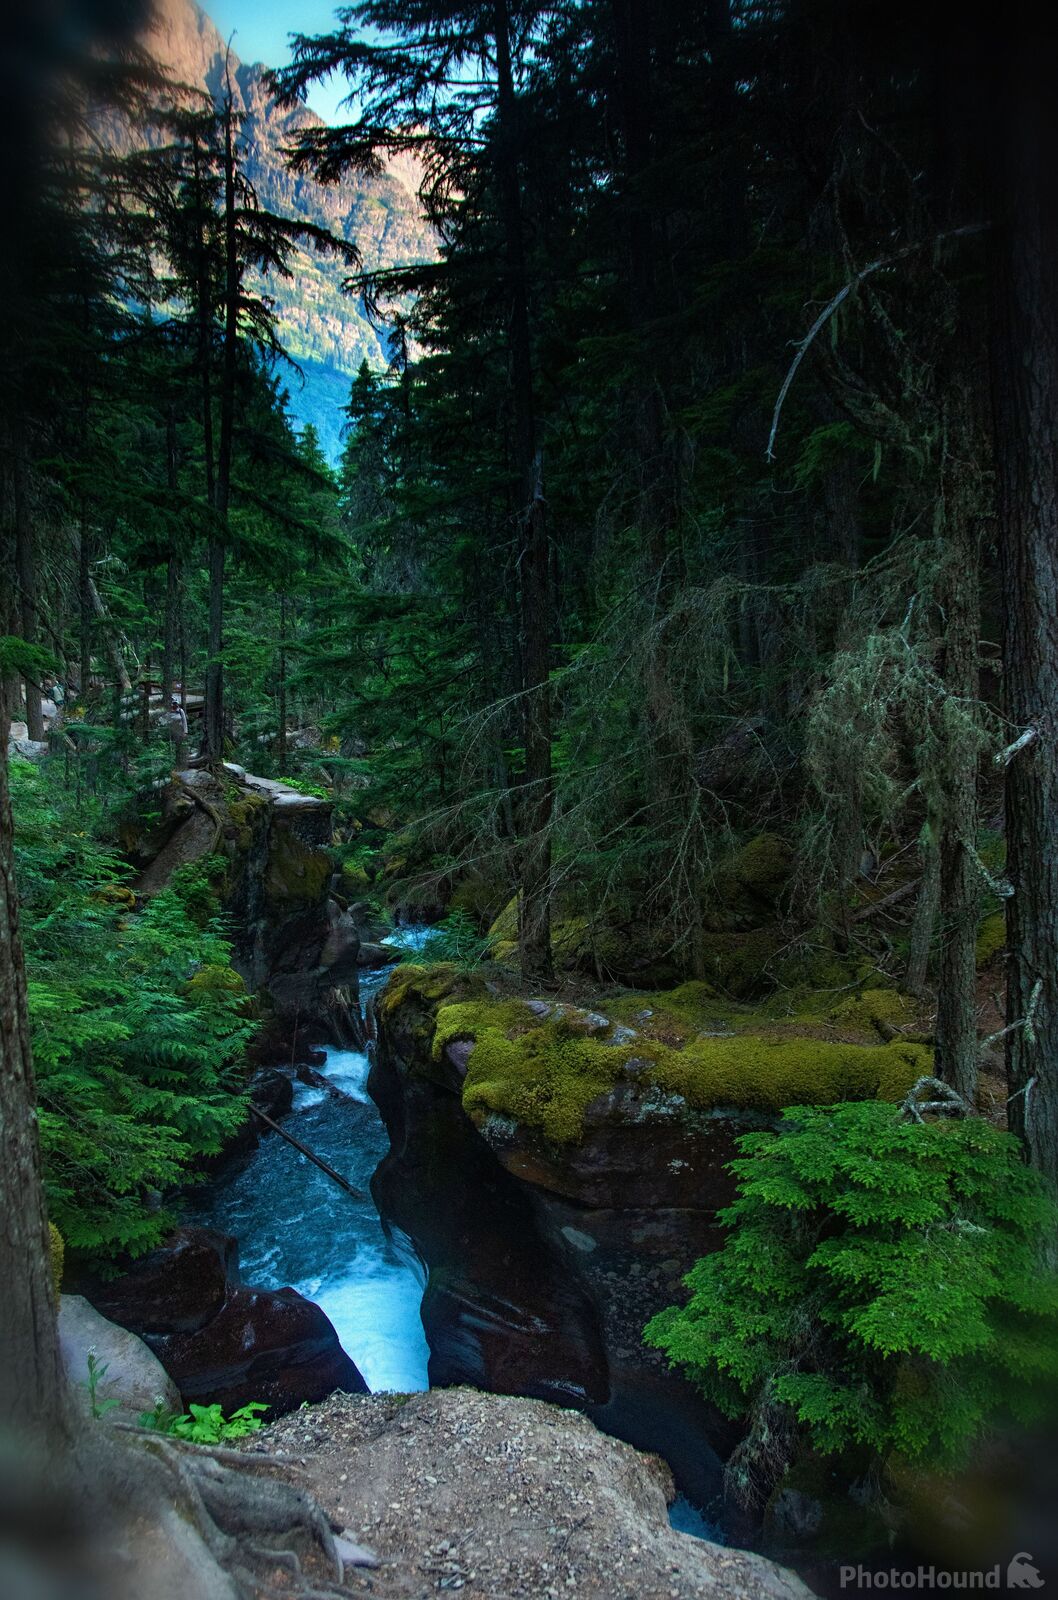 Image of Avalanche Gorge by Charley Corace